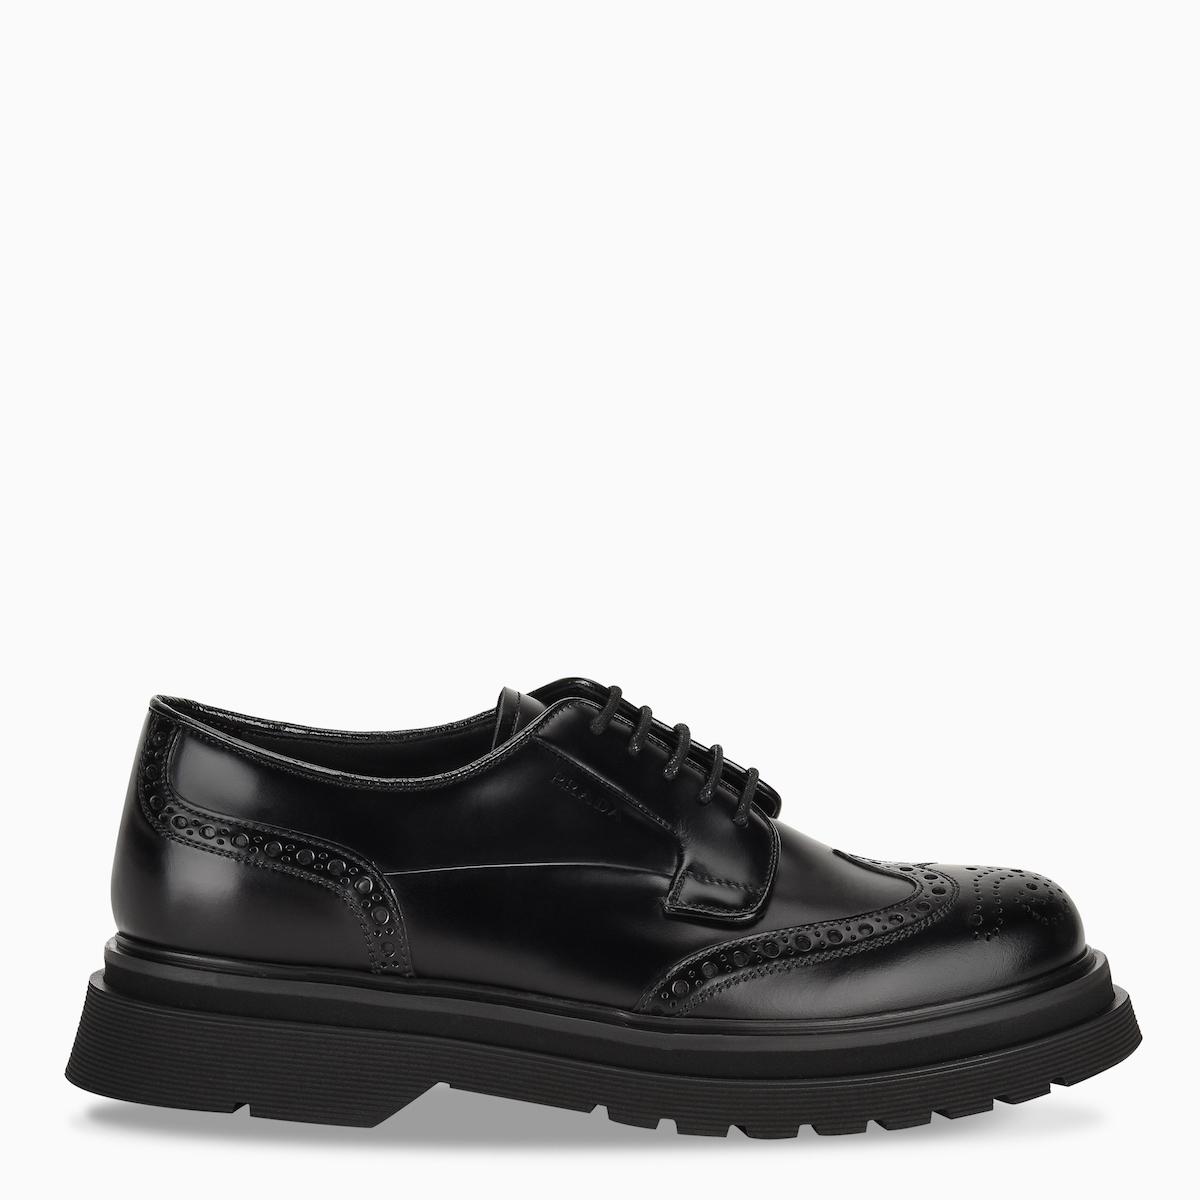 Prada Black Leather Derby Lace-up for Men - Lyst